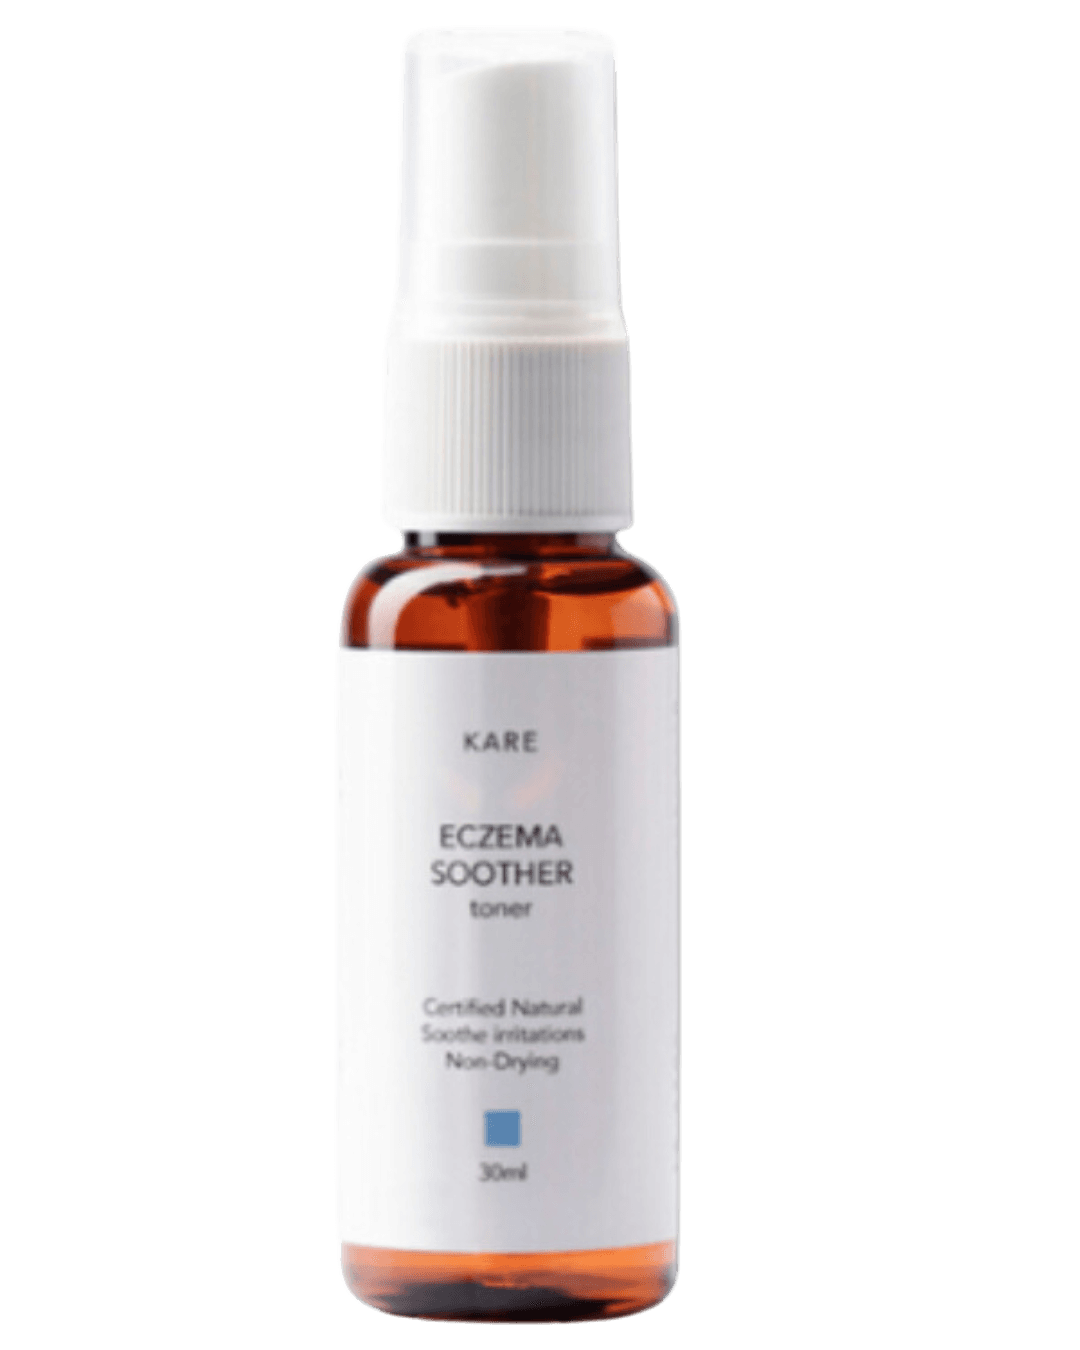 Sharyln &#038; Co KARE Eczema Soother Toner